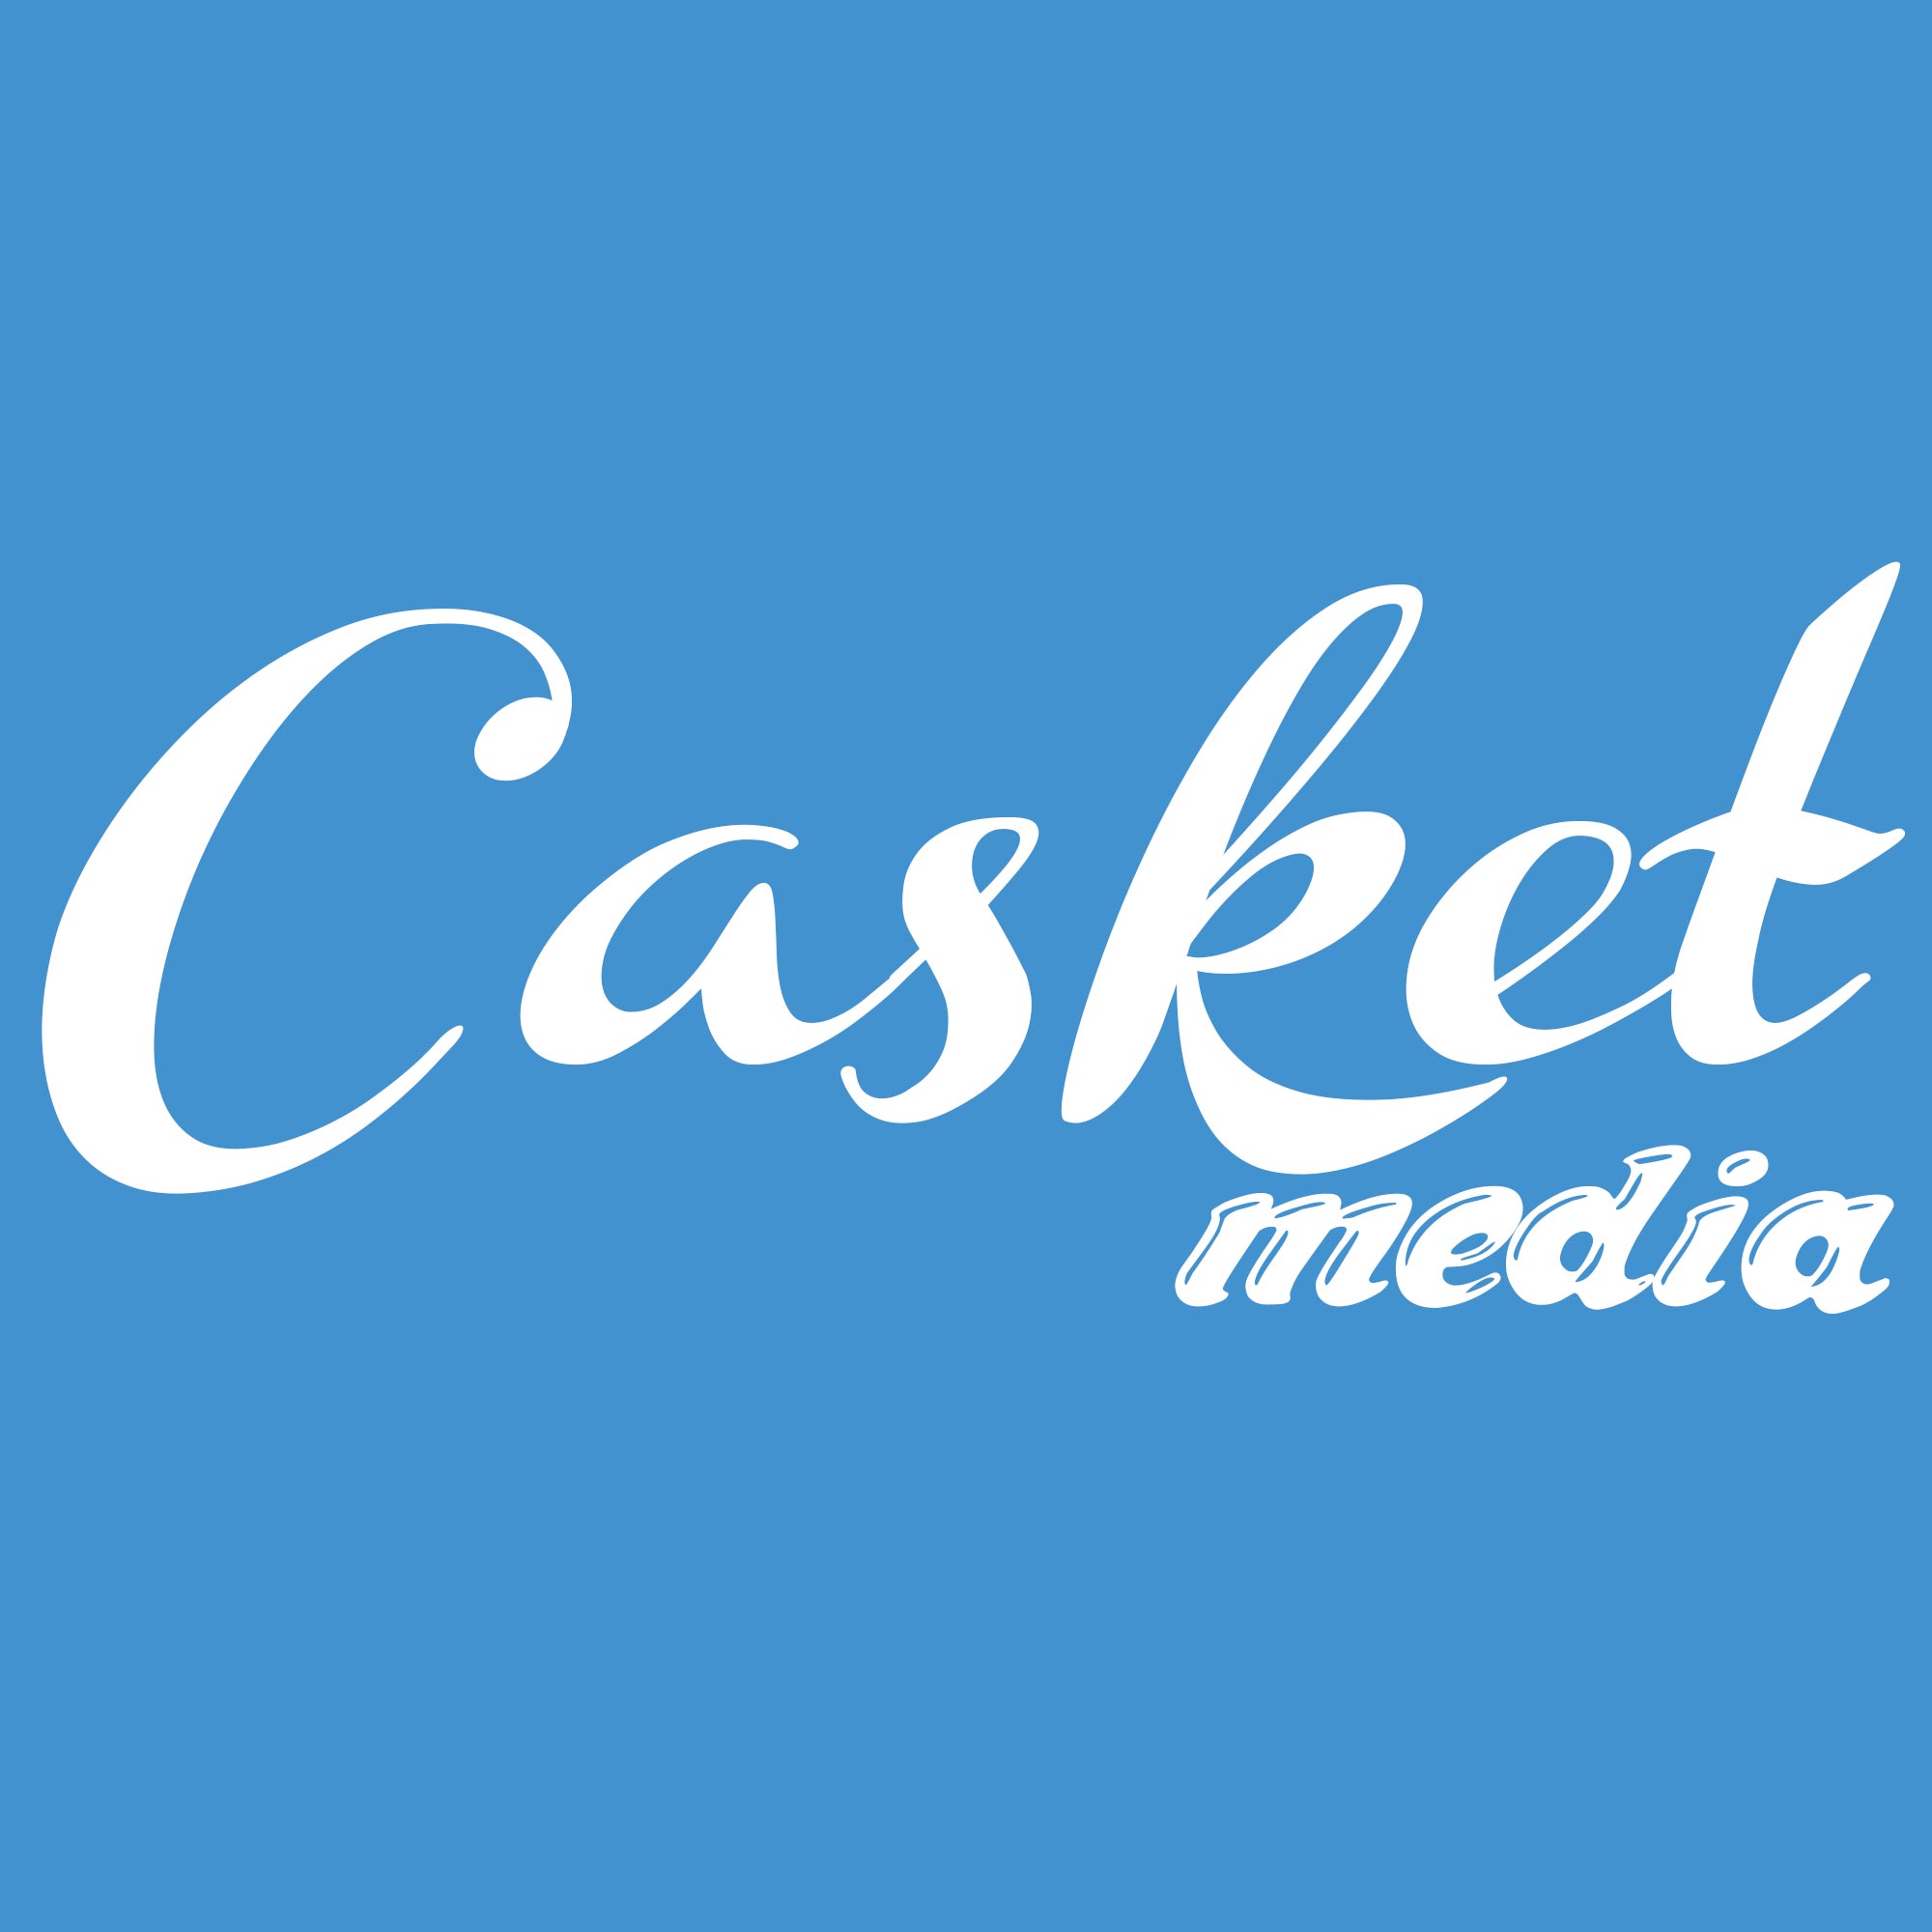 Casket Media - Business Startup Resources from Success to Significance